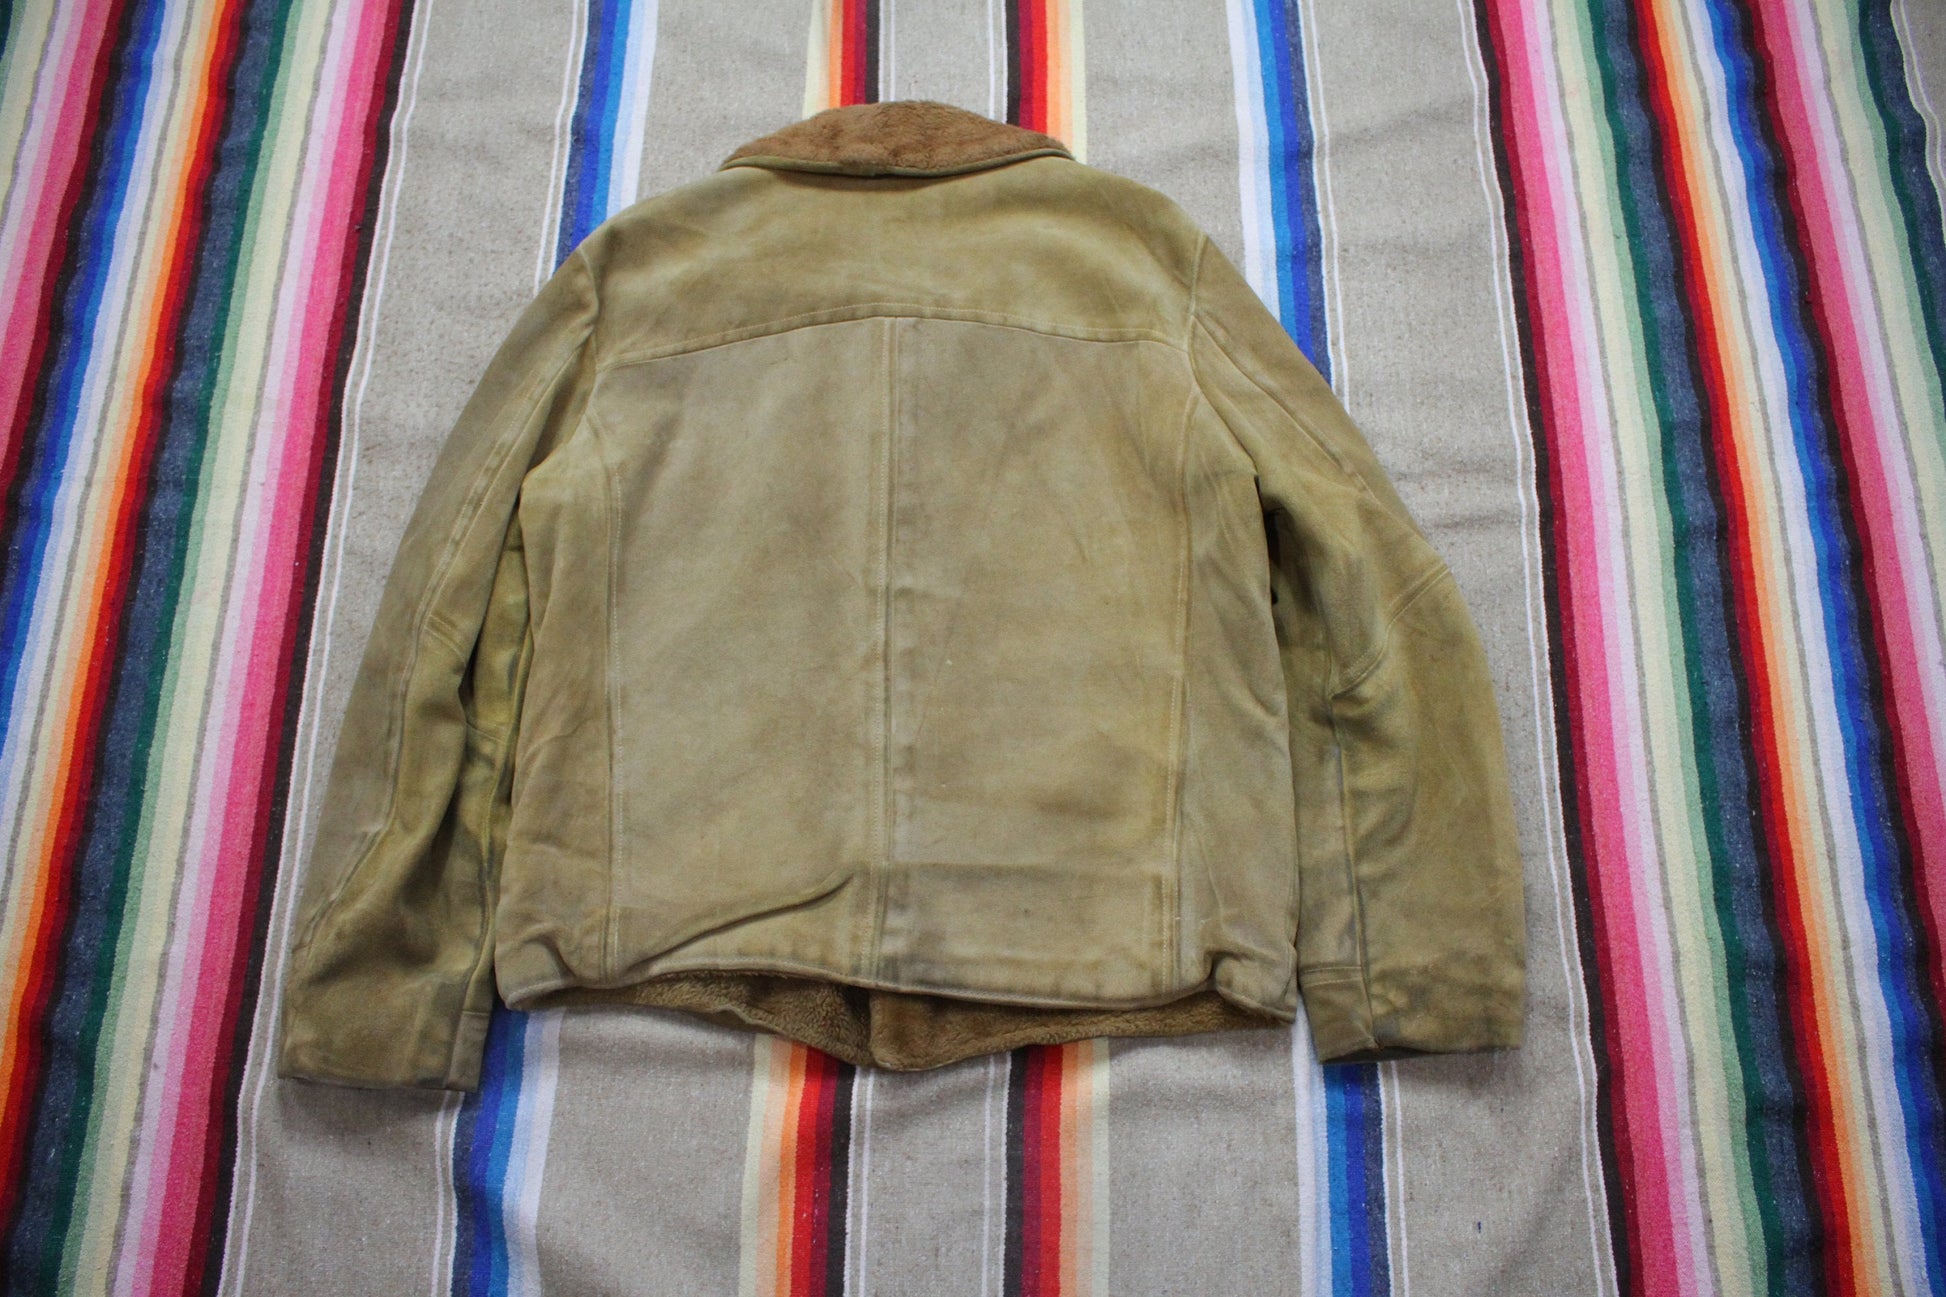 1960s/1970s Penneys Shearling Leather Jacket Size L/XL